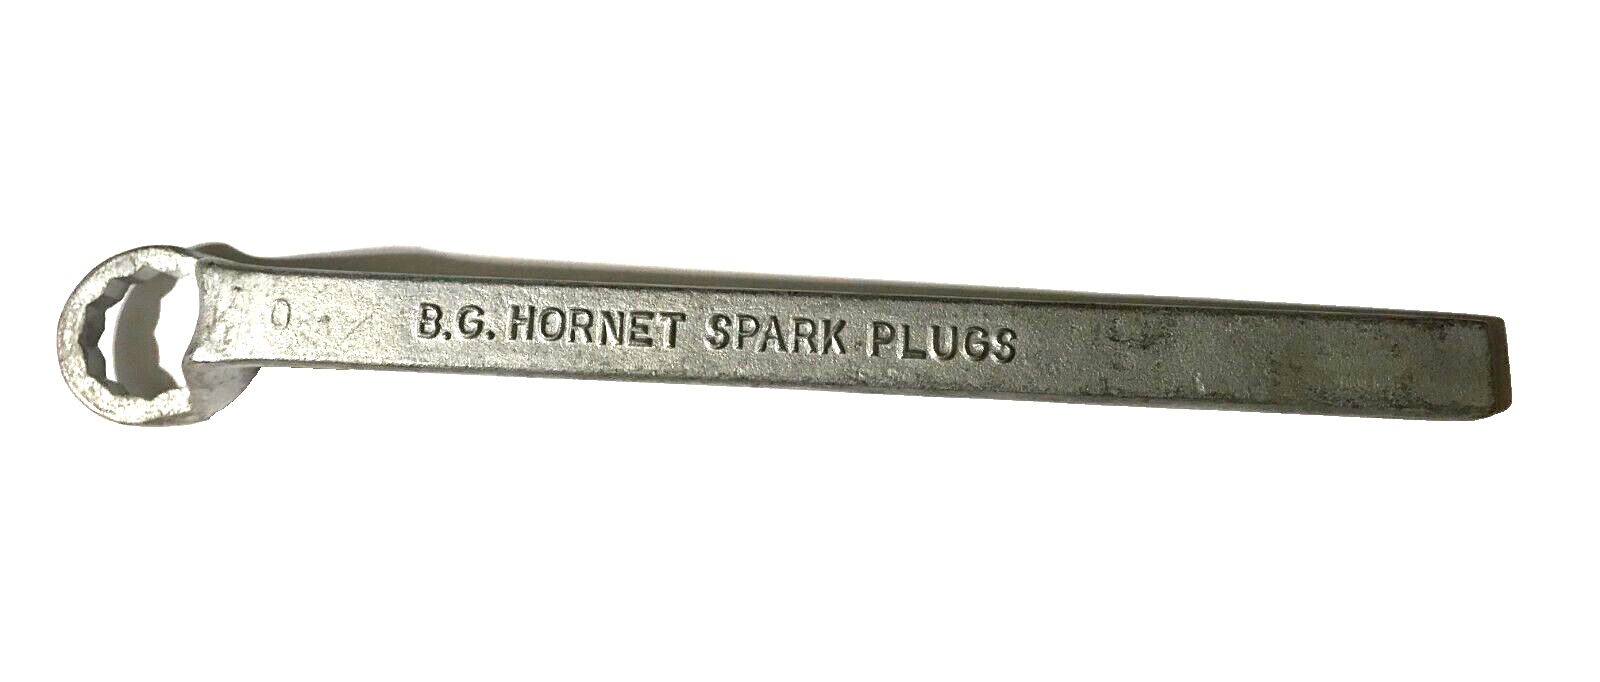 B G HORNET OFFSET SPARK PLUG BOX WRENCH 12 point 11/16 inch AIRCRAFT SINGLE-END